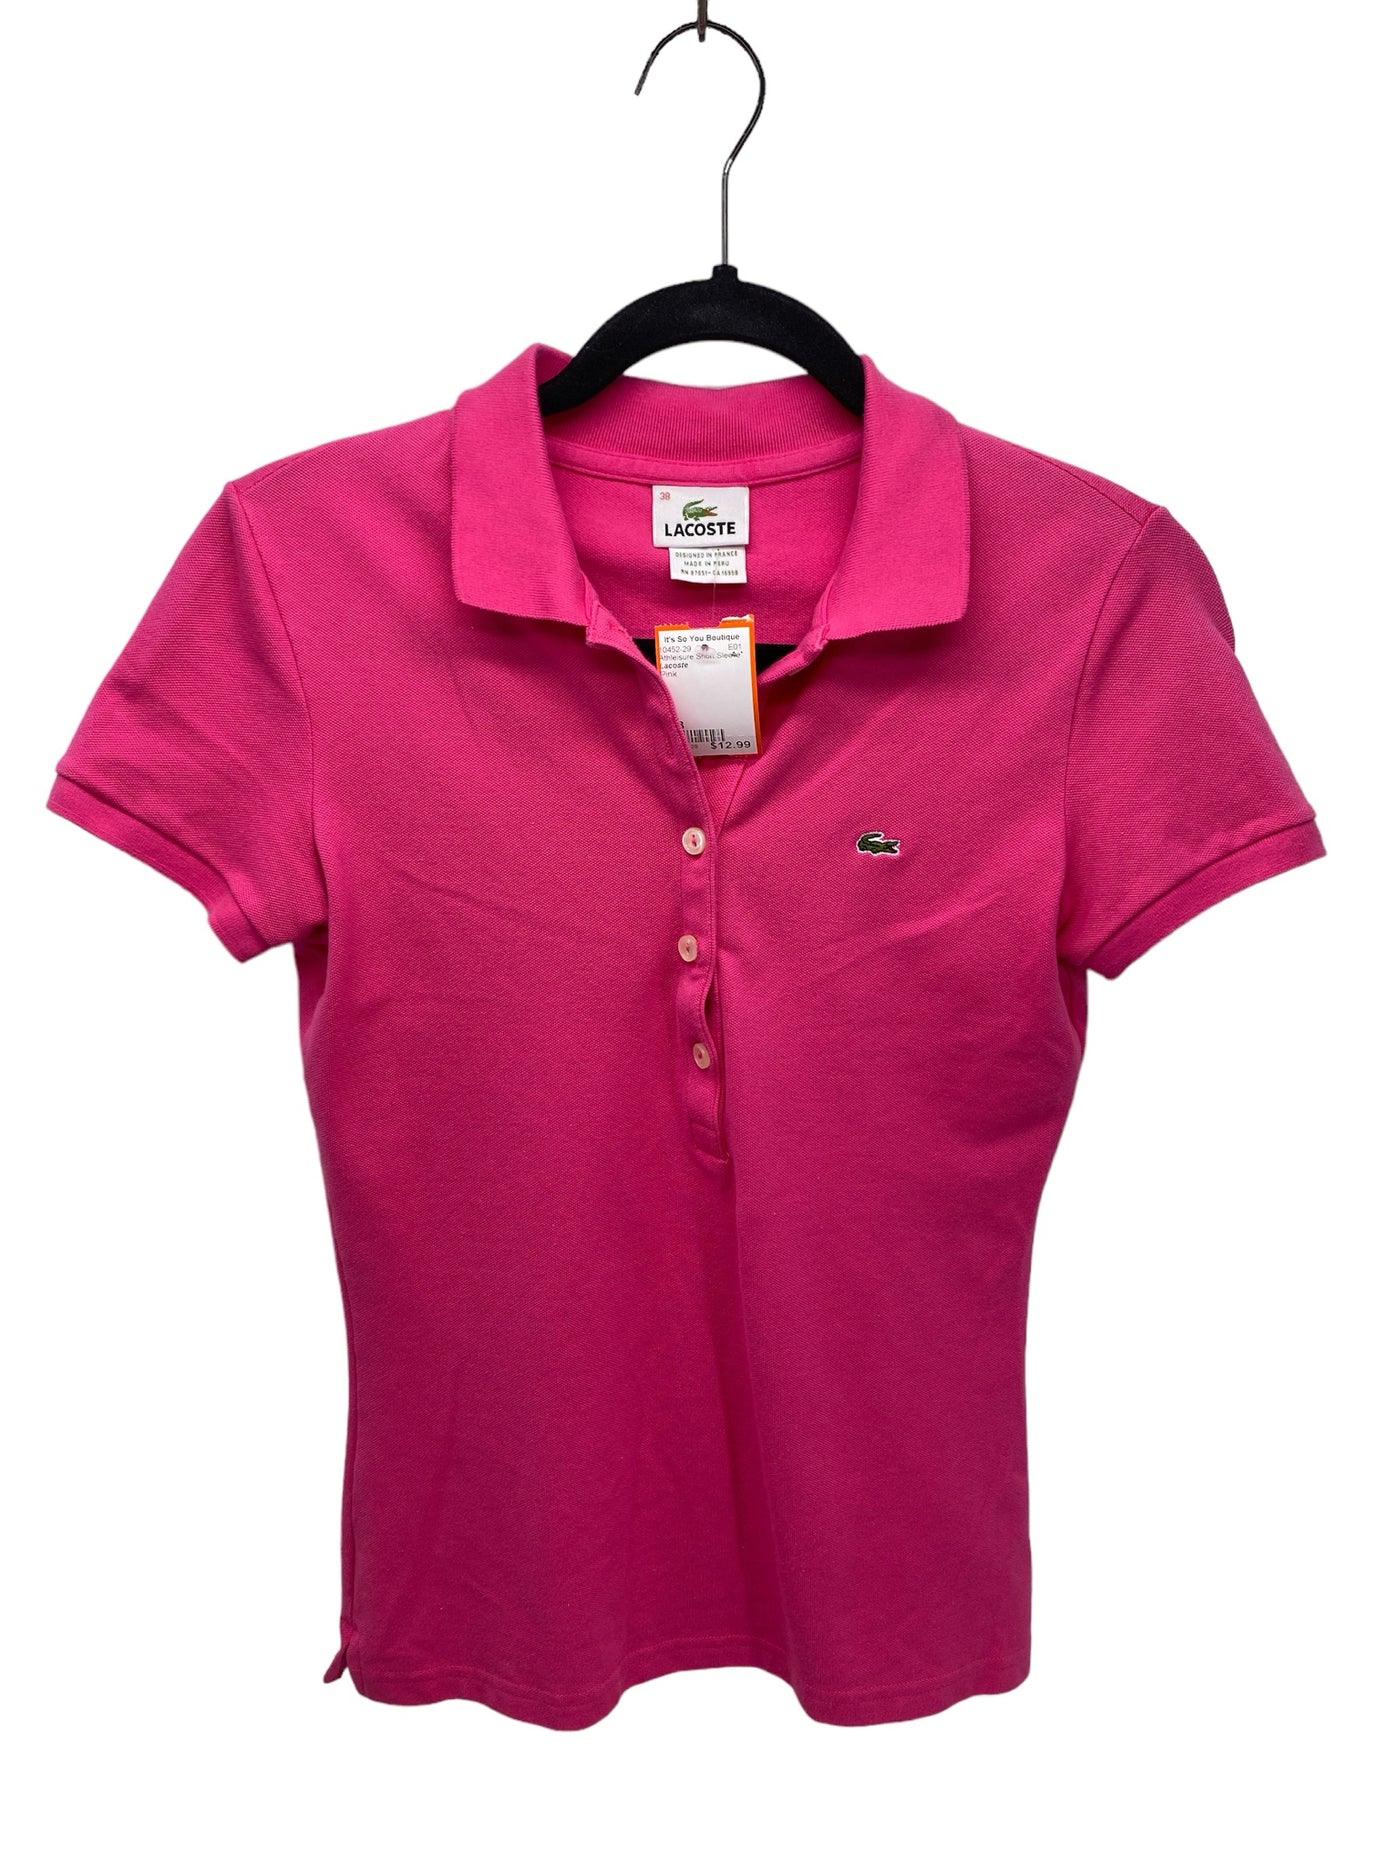 Lacoste Misses Size 38 Pink Athleisure Short Sleeve